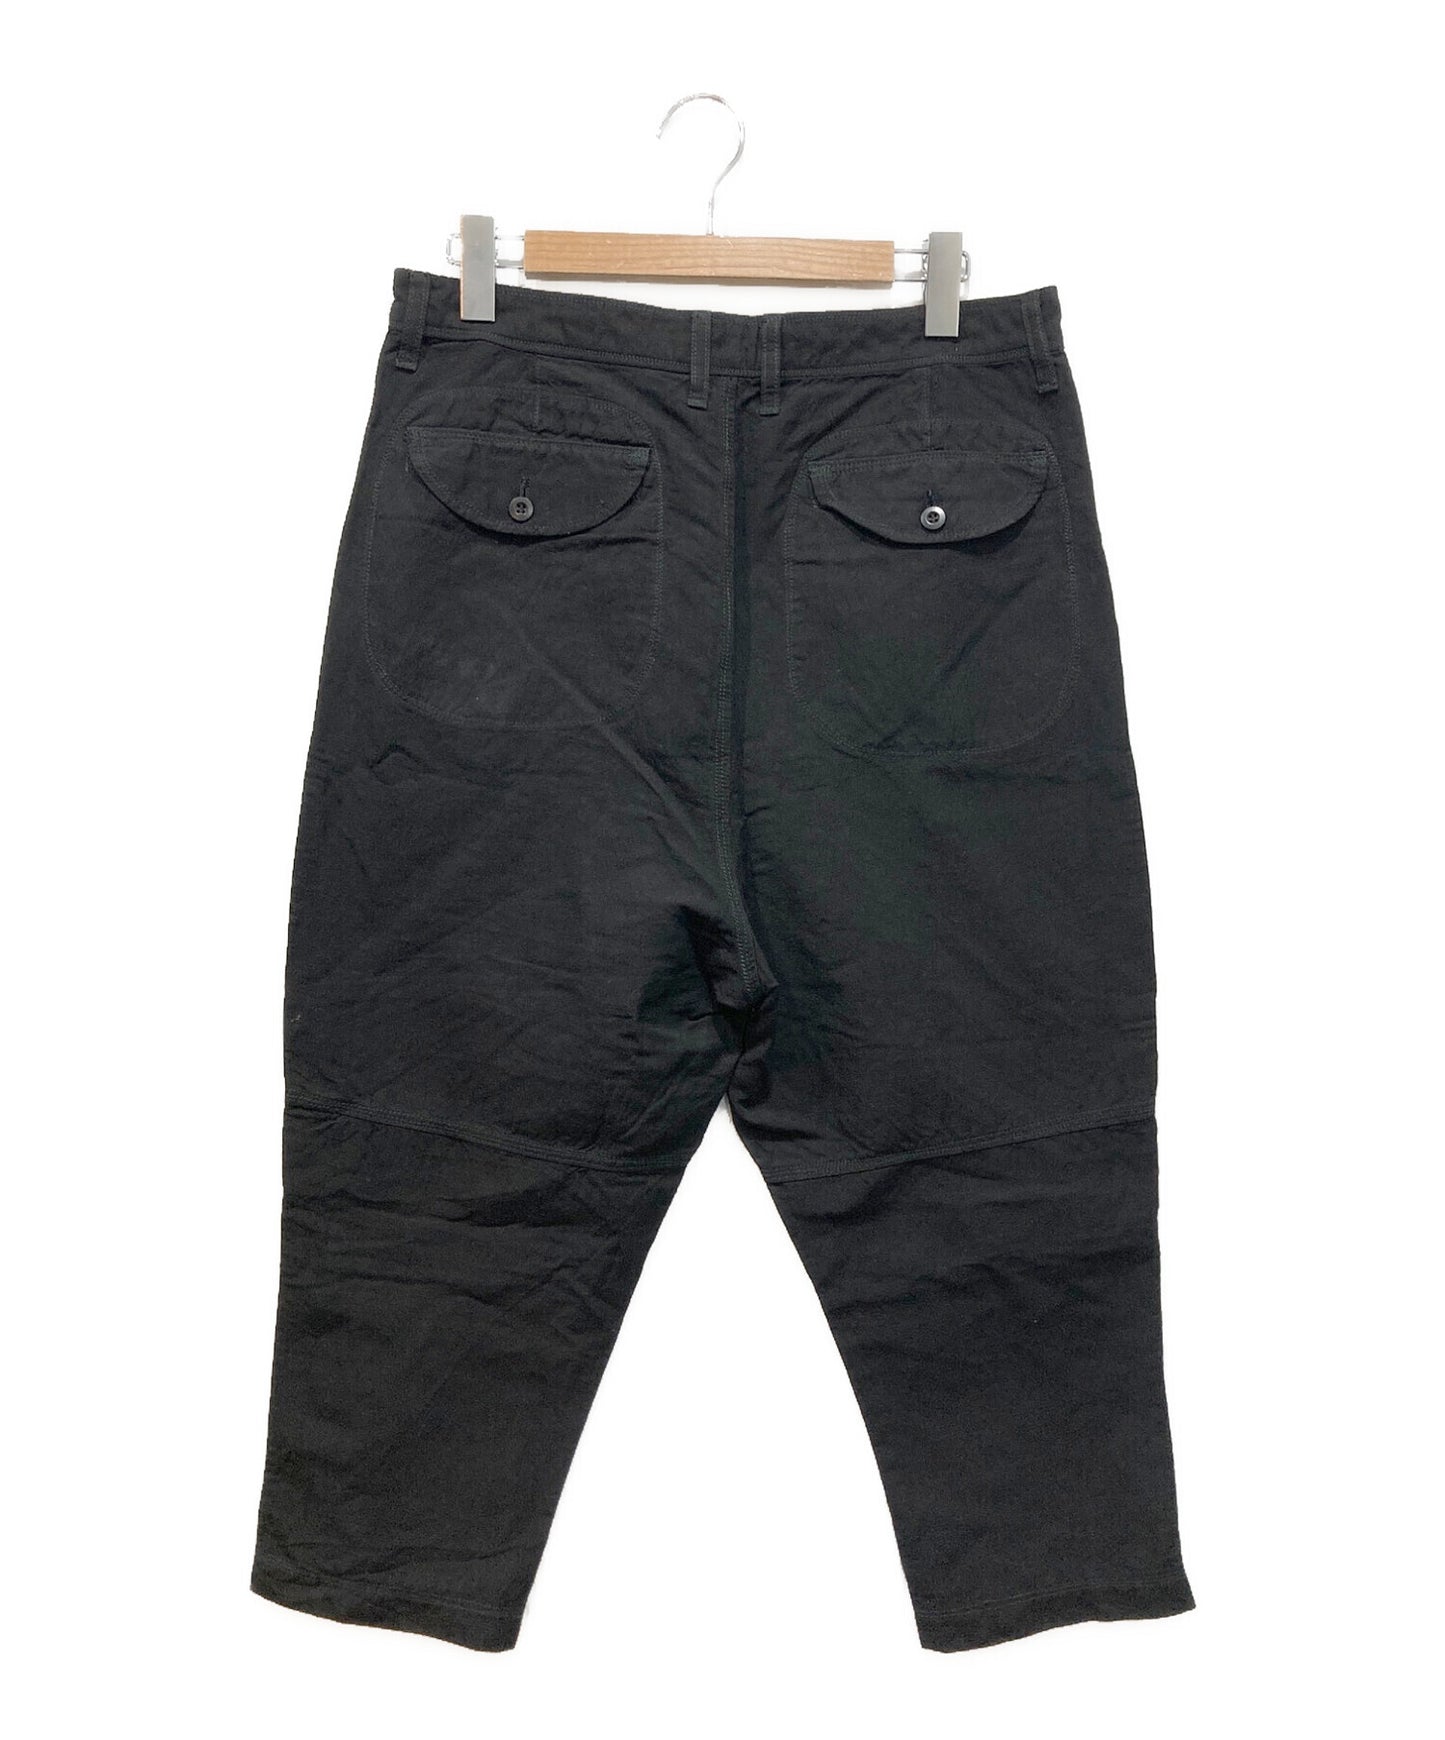 COMME des GARCONS JUNYA WATANABE MAN Product-dyed stitch design sarouel  tapered pants WG-P001